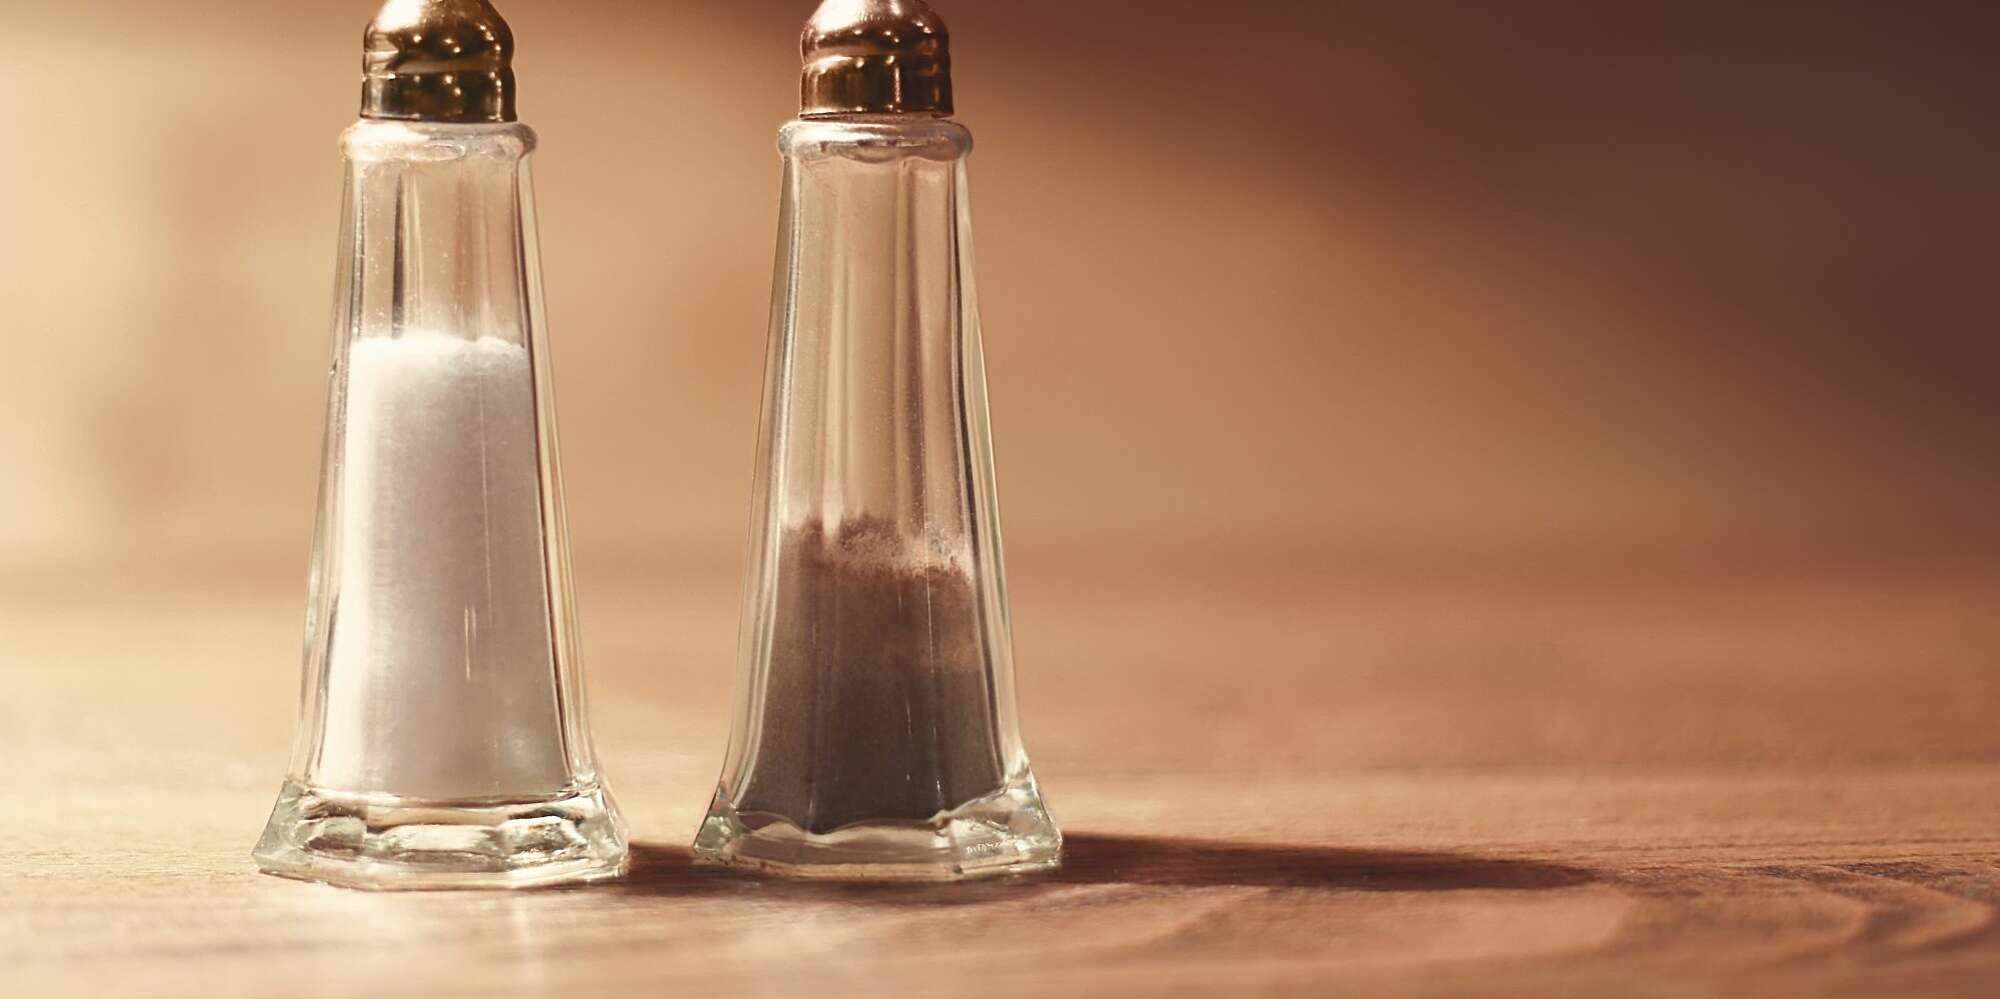 This Salt-and-Pepper Shaker Hack Is the Only Internet Thing That